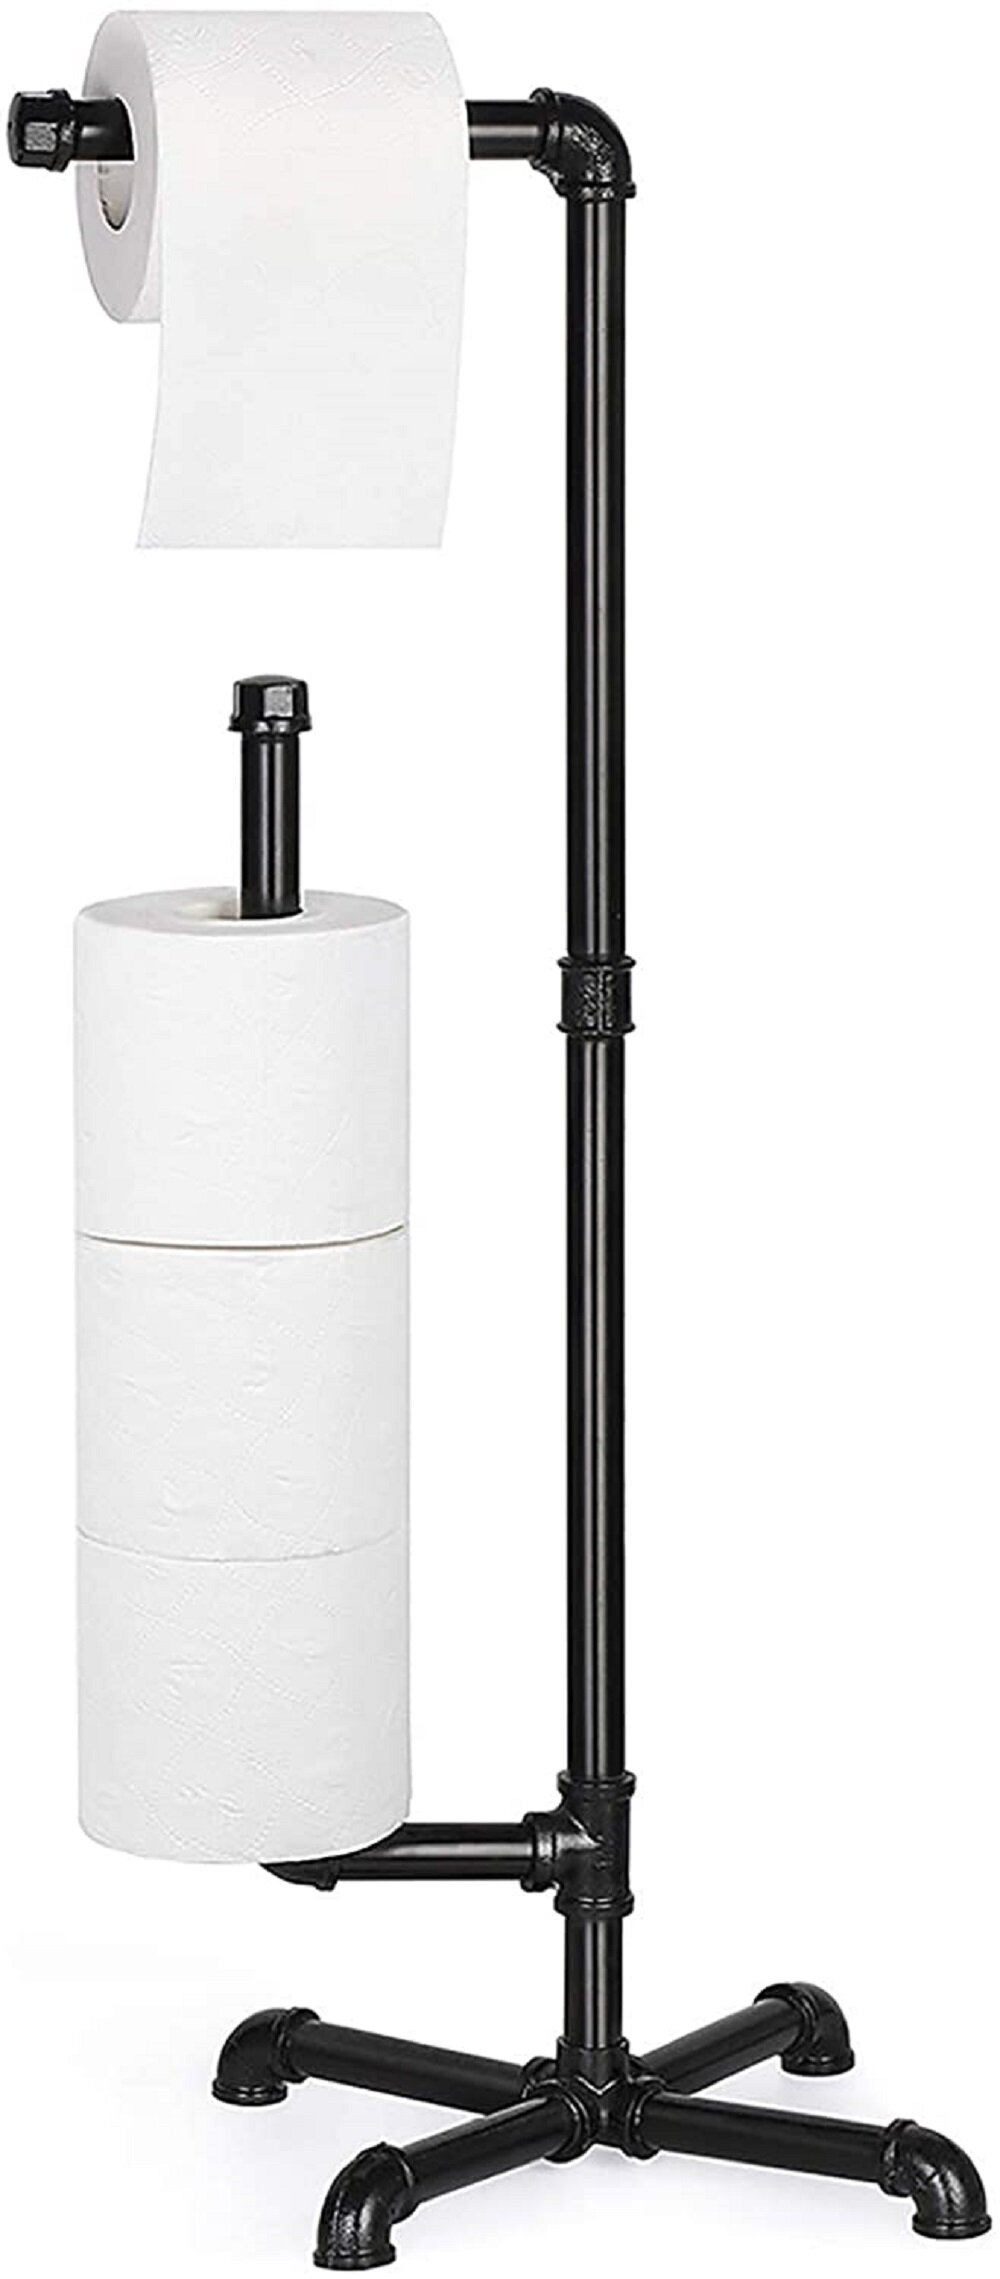  F-color Toilet Paper Holder Stand Toilet Paper Roll Holder Stand  and Dispenser for 6 Spare Rolls, Free Standing Toilet Paper Holder with  Shelf for Bathroom, Black : Tools & Home Improvement